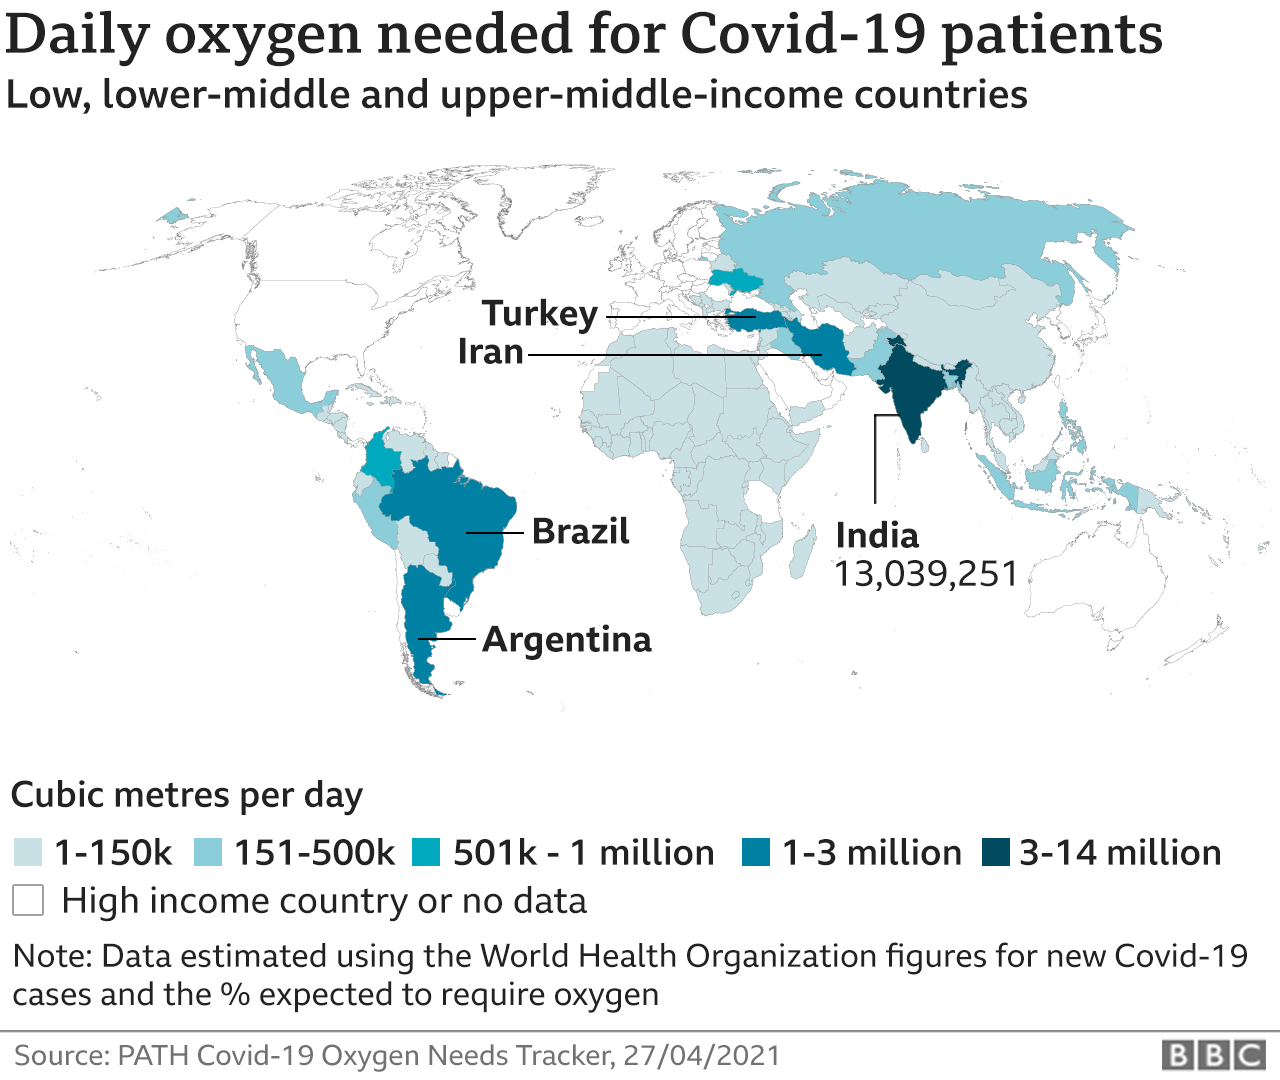 Map showing estimated oxygen needs across low, middle and upper-middle-income countries, with India the highest